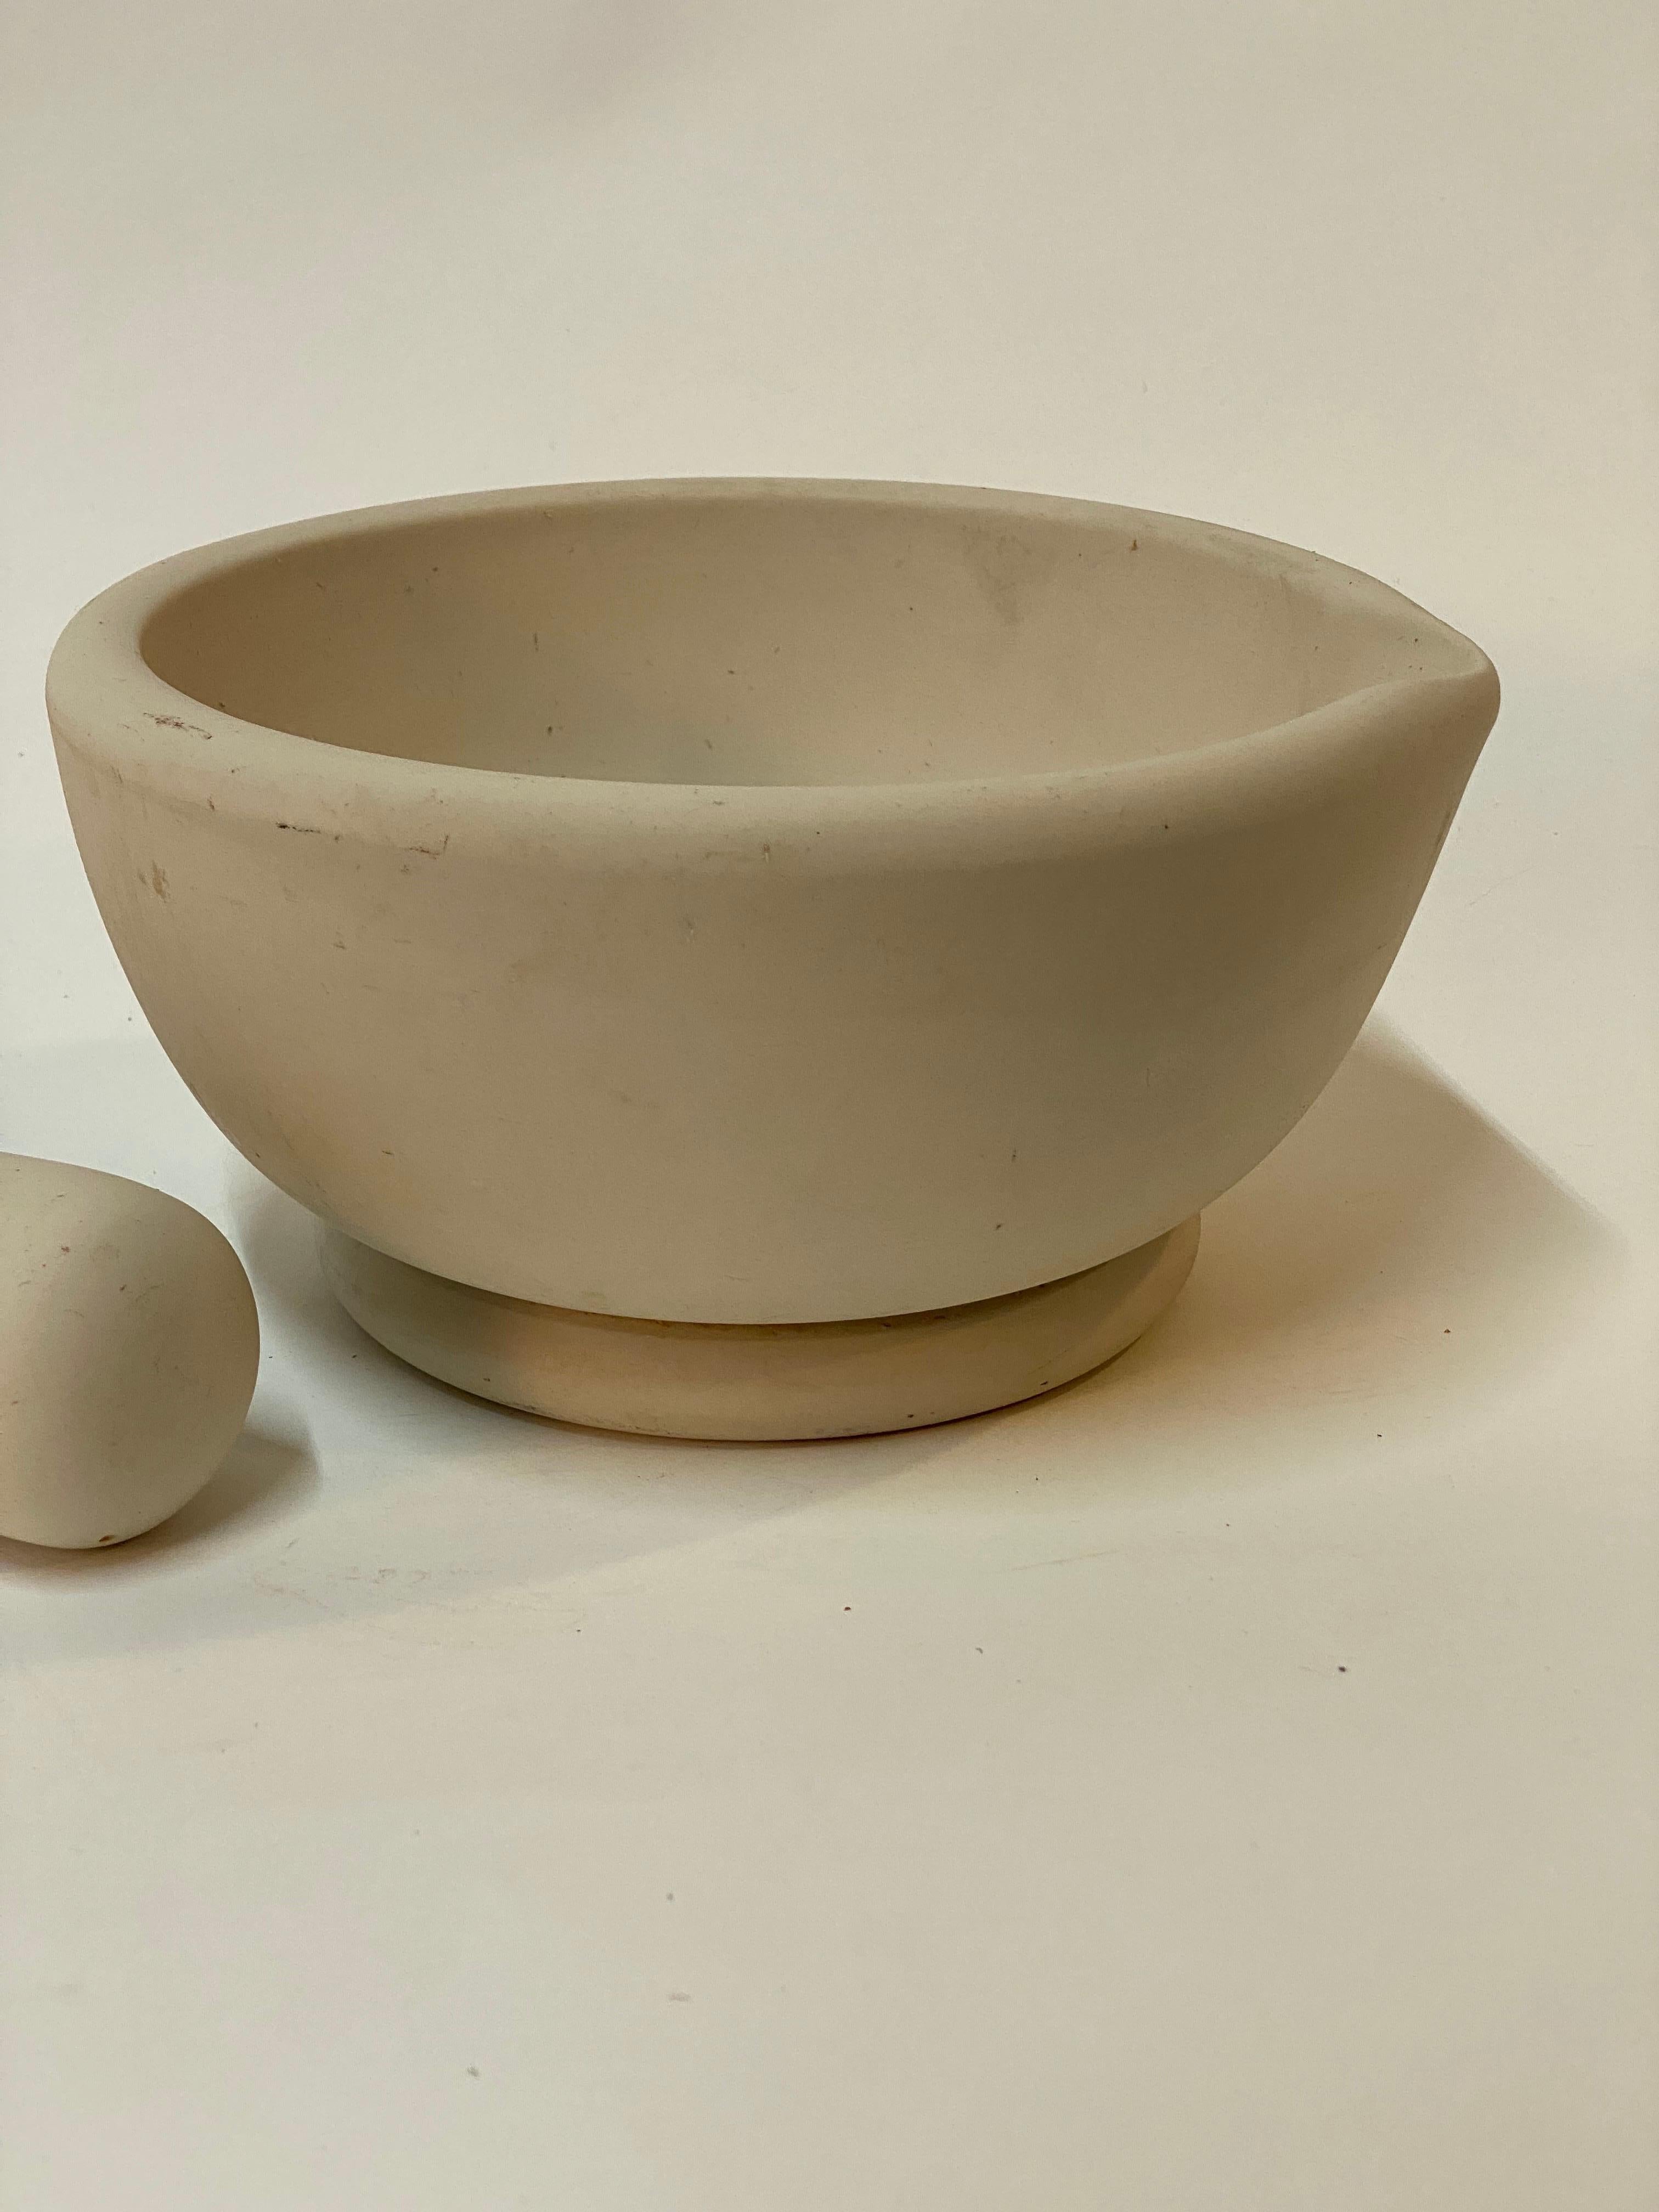 Mid-20th Century English Porcelain Mortar and Pestle #7 For Sale